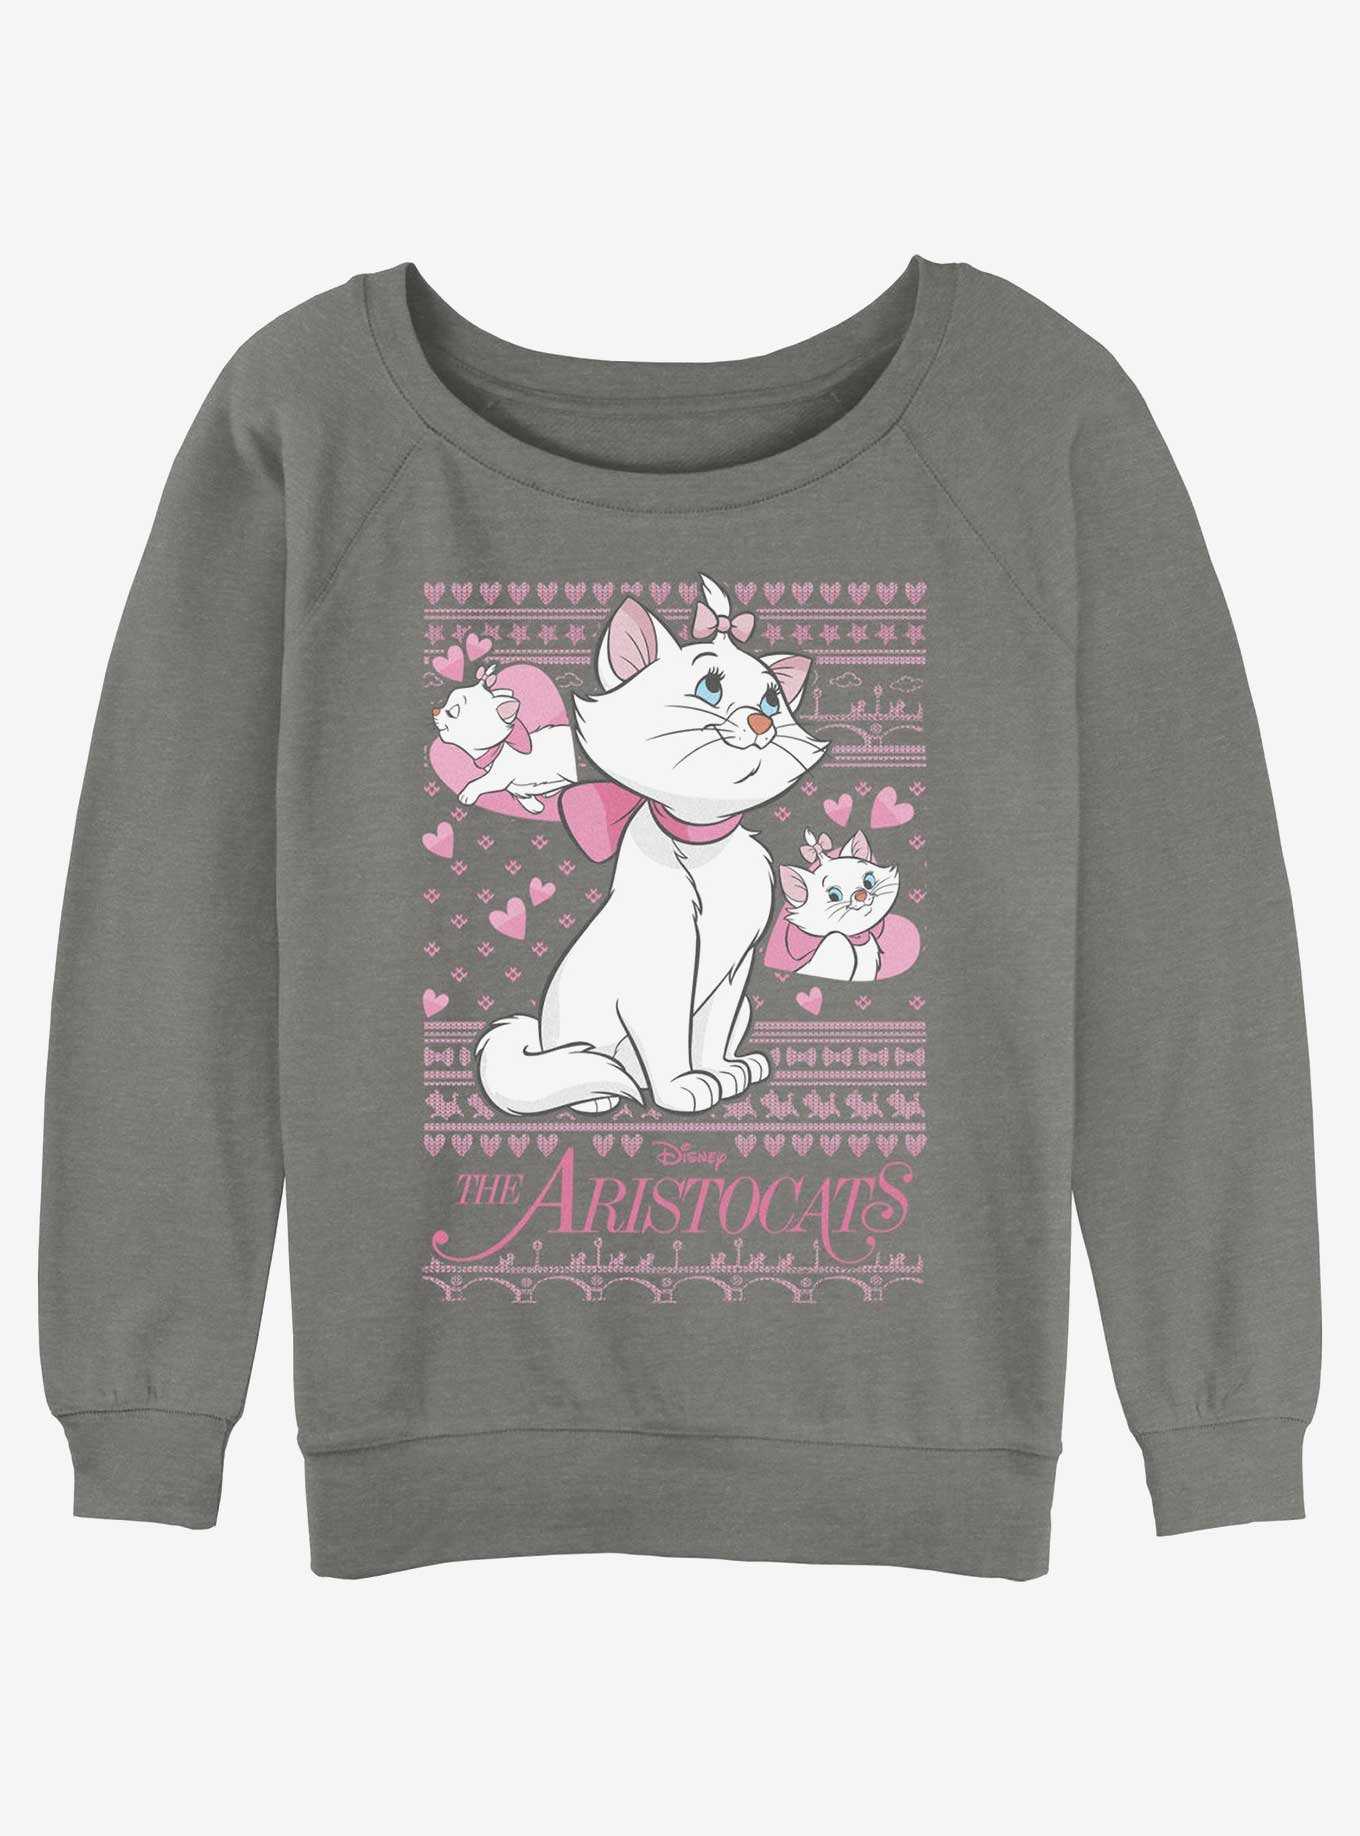 OFFICIAL The Aristocats Gifts & Shirts, Boxlunch Merchandise 